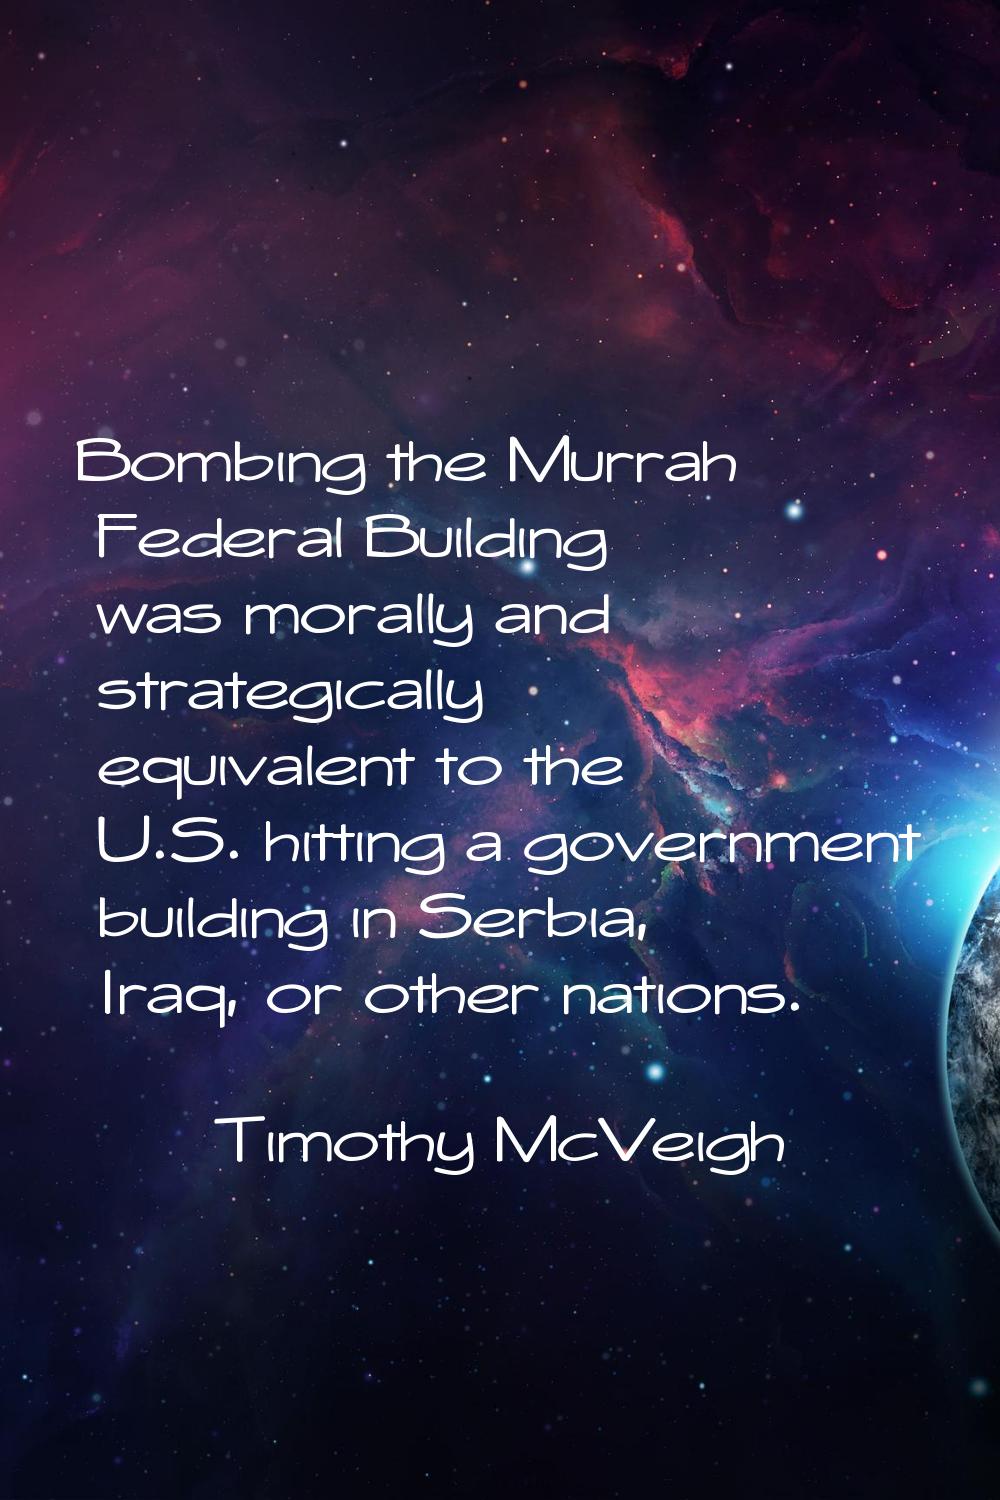 Bombing the Murrah Federal Building was morally and strategically equivalent to the U.S. hitting a 